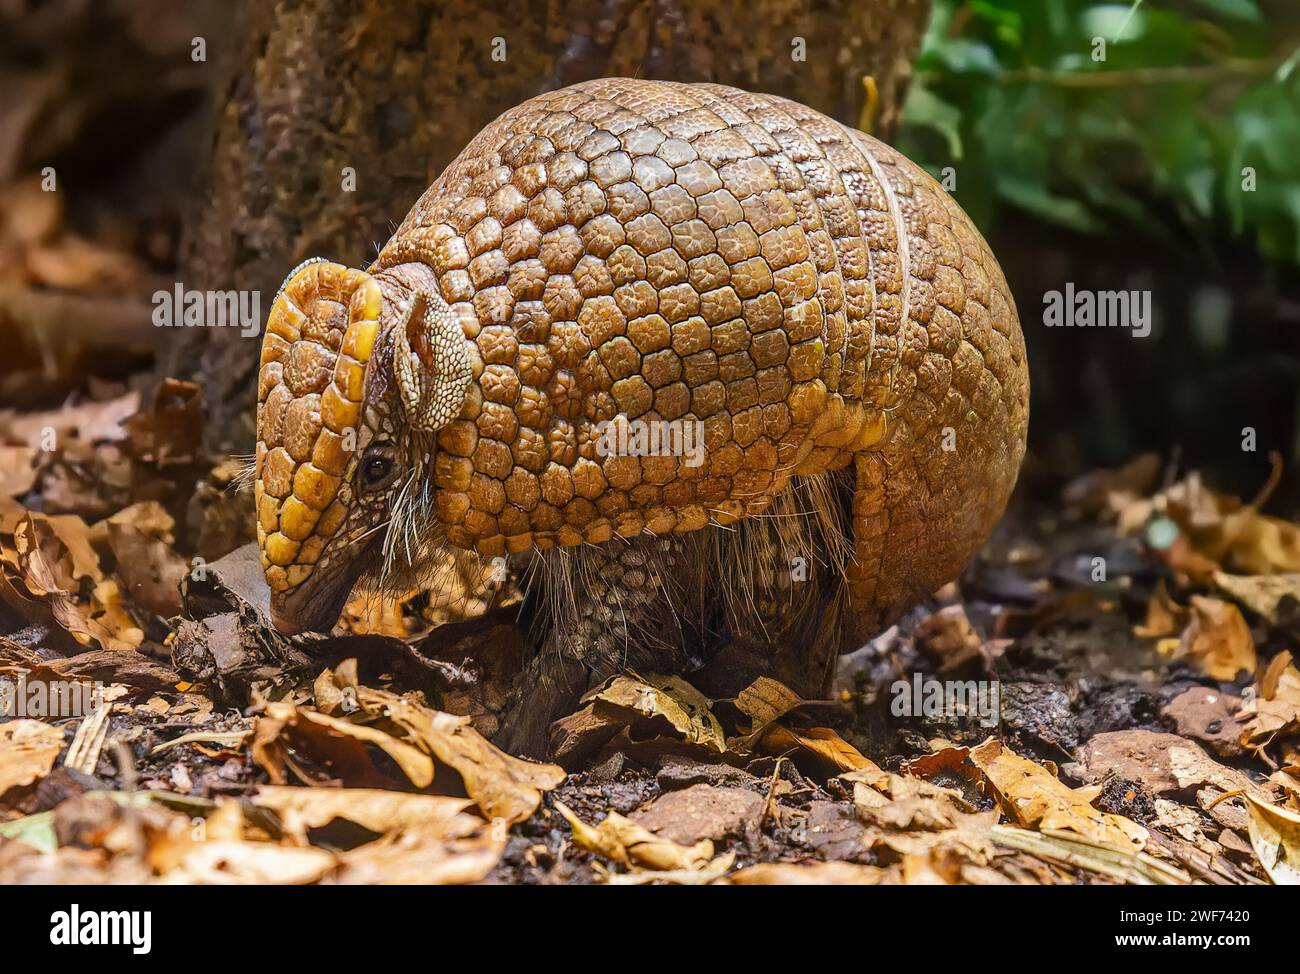 Close up view of a Southern three-banded armadillo (Tolypeutes matacus) Stock Photo